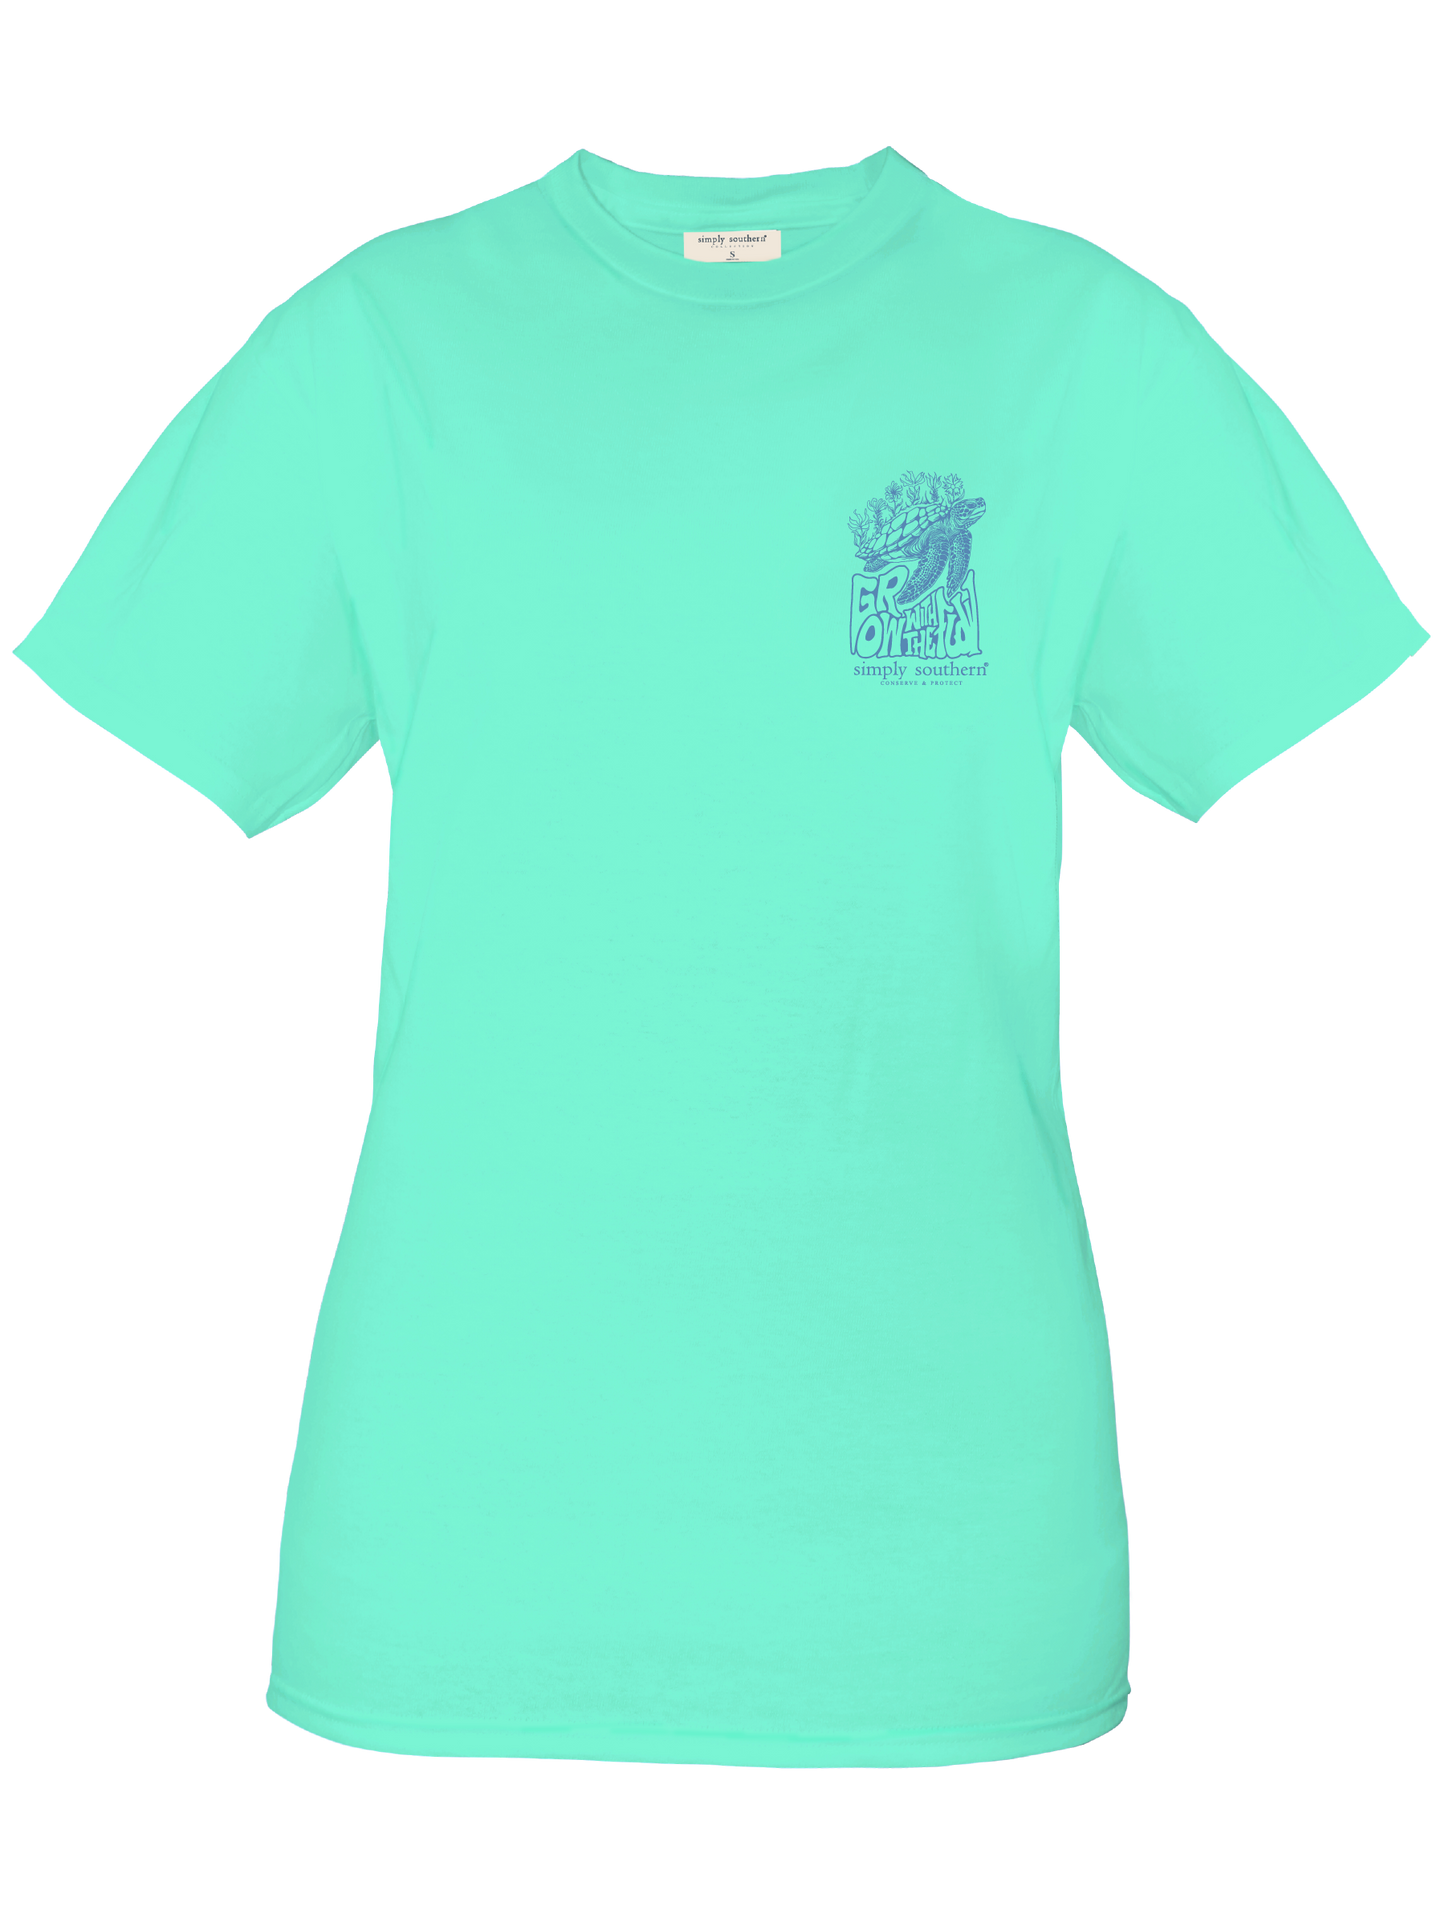 Girls Youth Grow With The Flow Short Sleeve T-Shirt